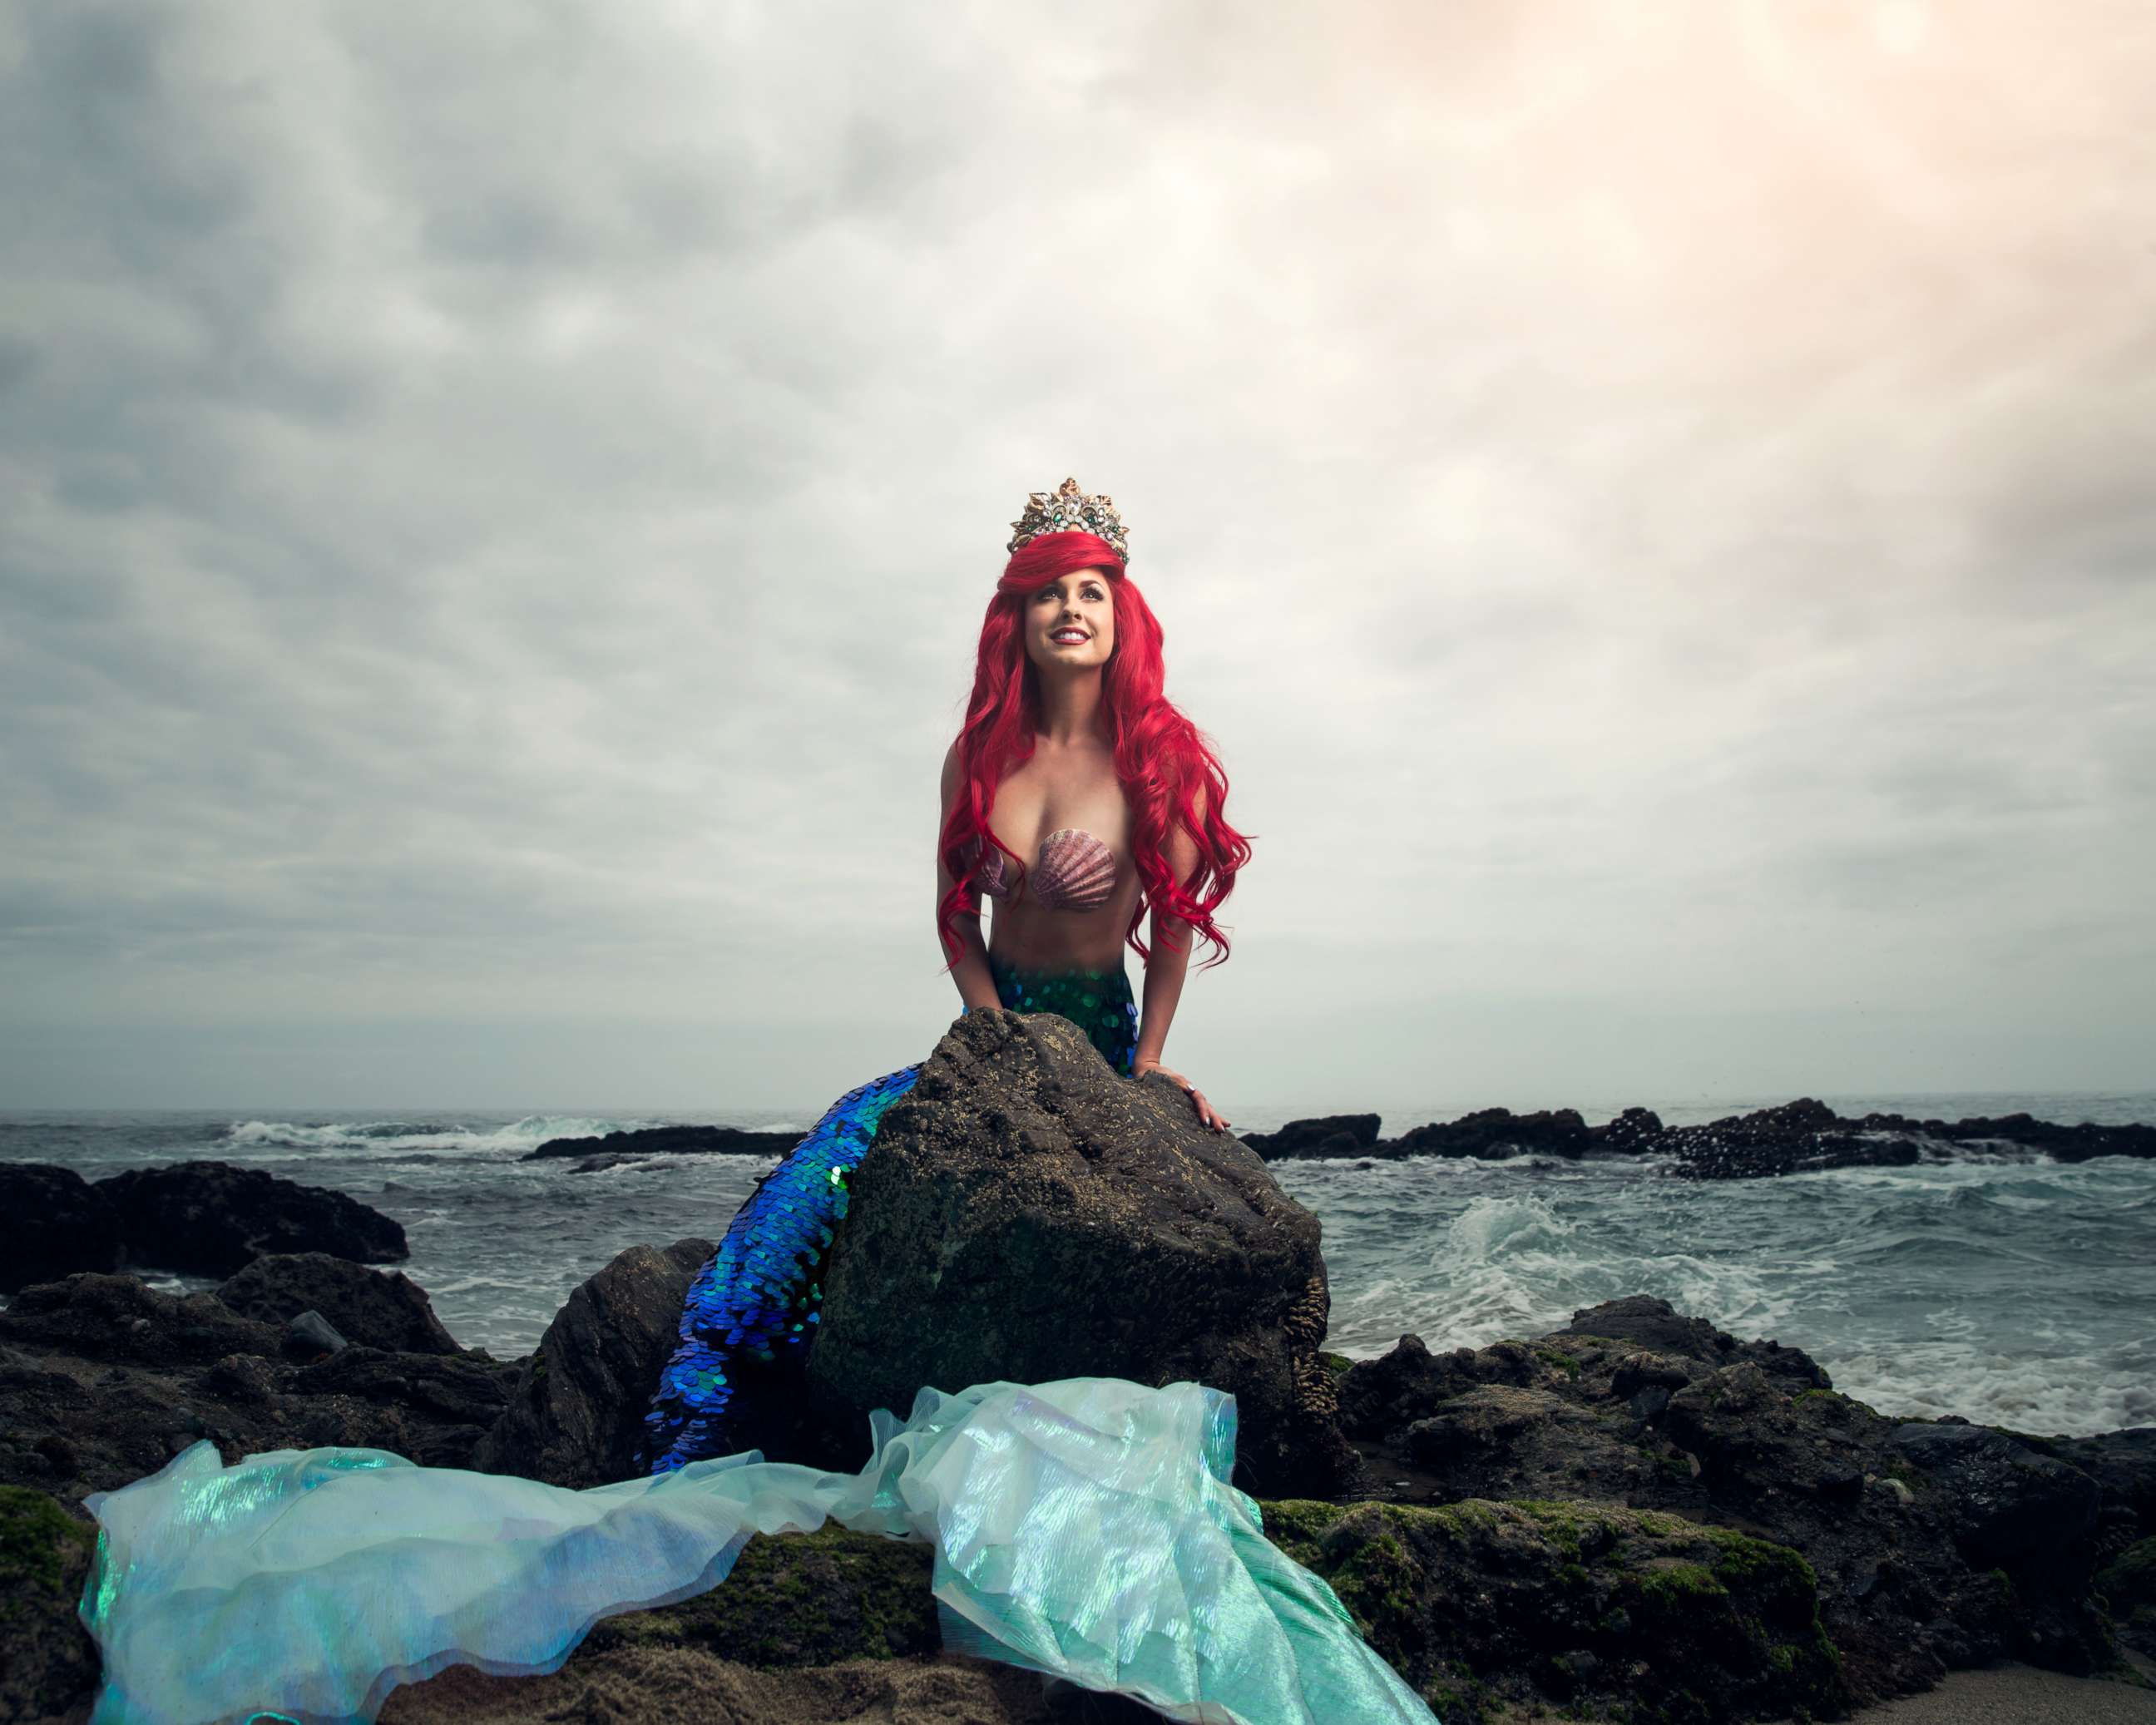 PHOTO: Traci Hines poses as Ariel from Disney's "The Little Mermaid" in a photo shoot conceptualized by designer Nephi Garcia and photographer Tony Ross.